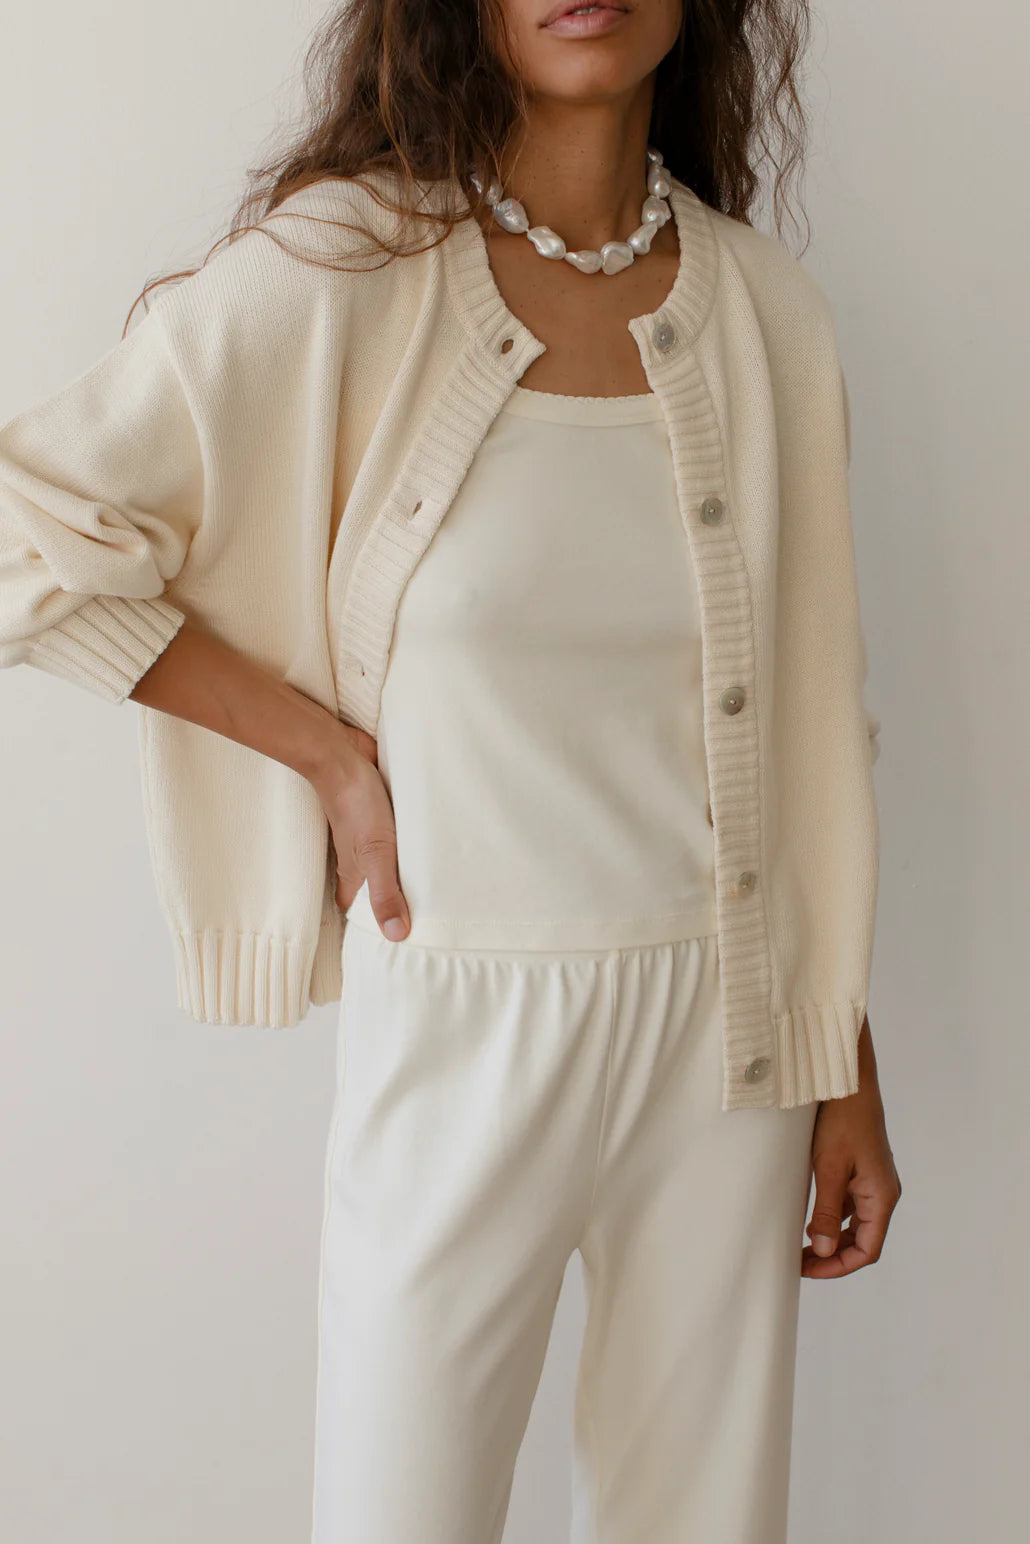 DONNI. The Cotton Knit Cardigan